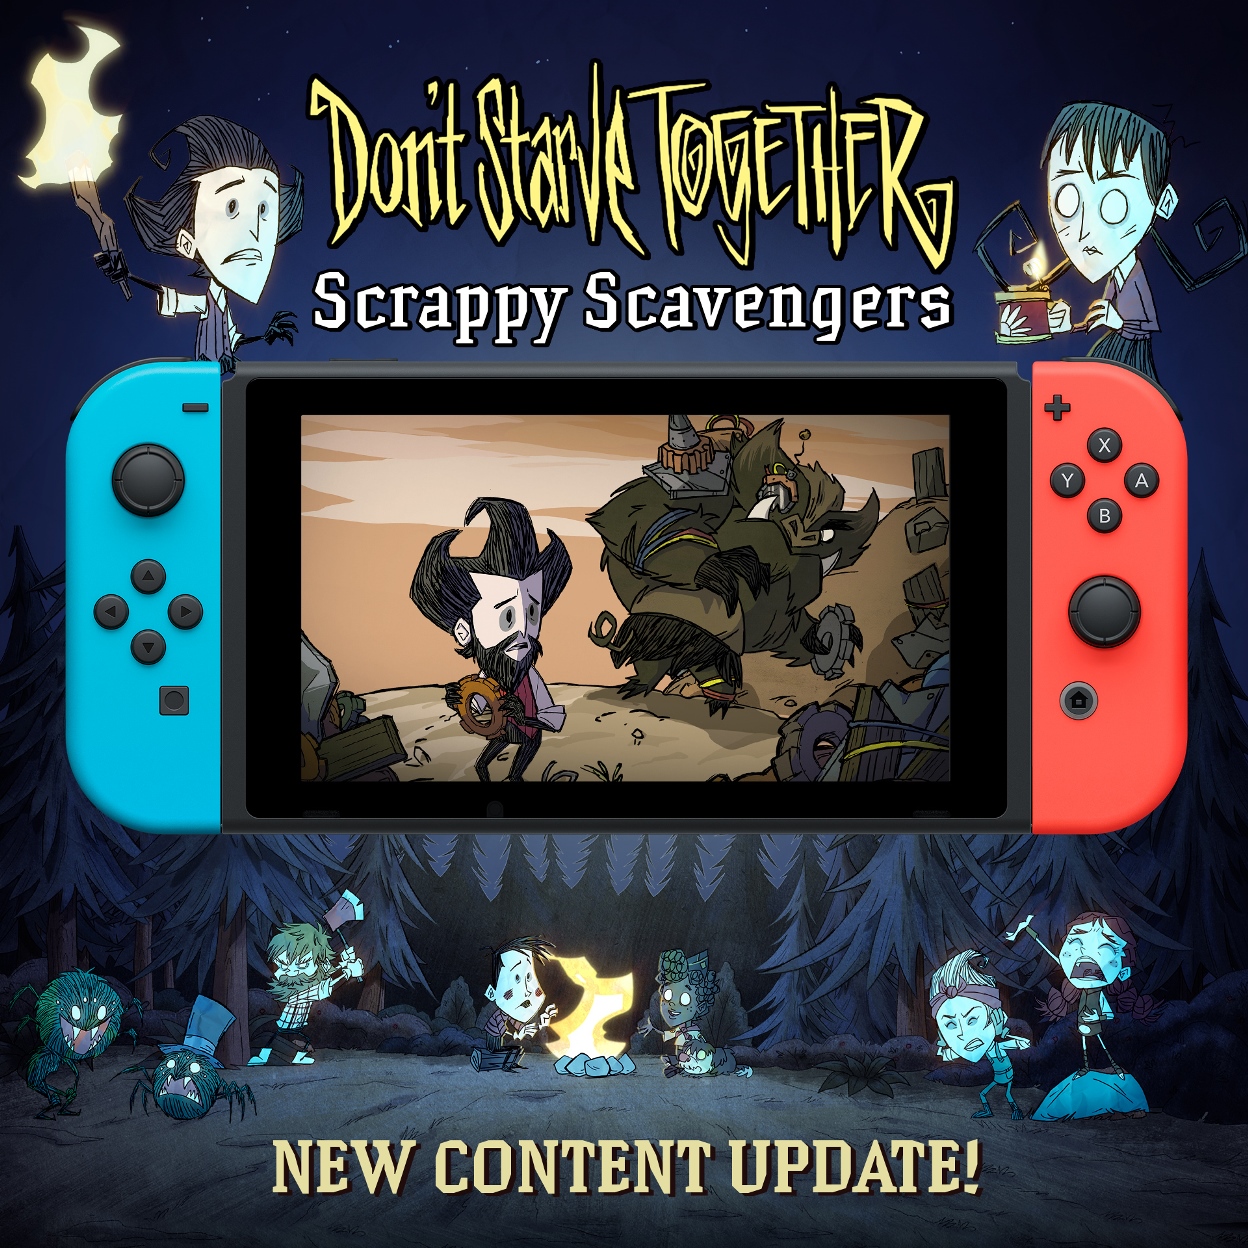 Don't Starve Together Scrappy Scavengers update